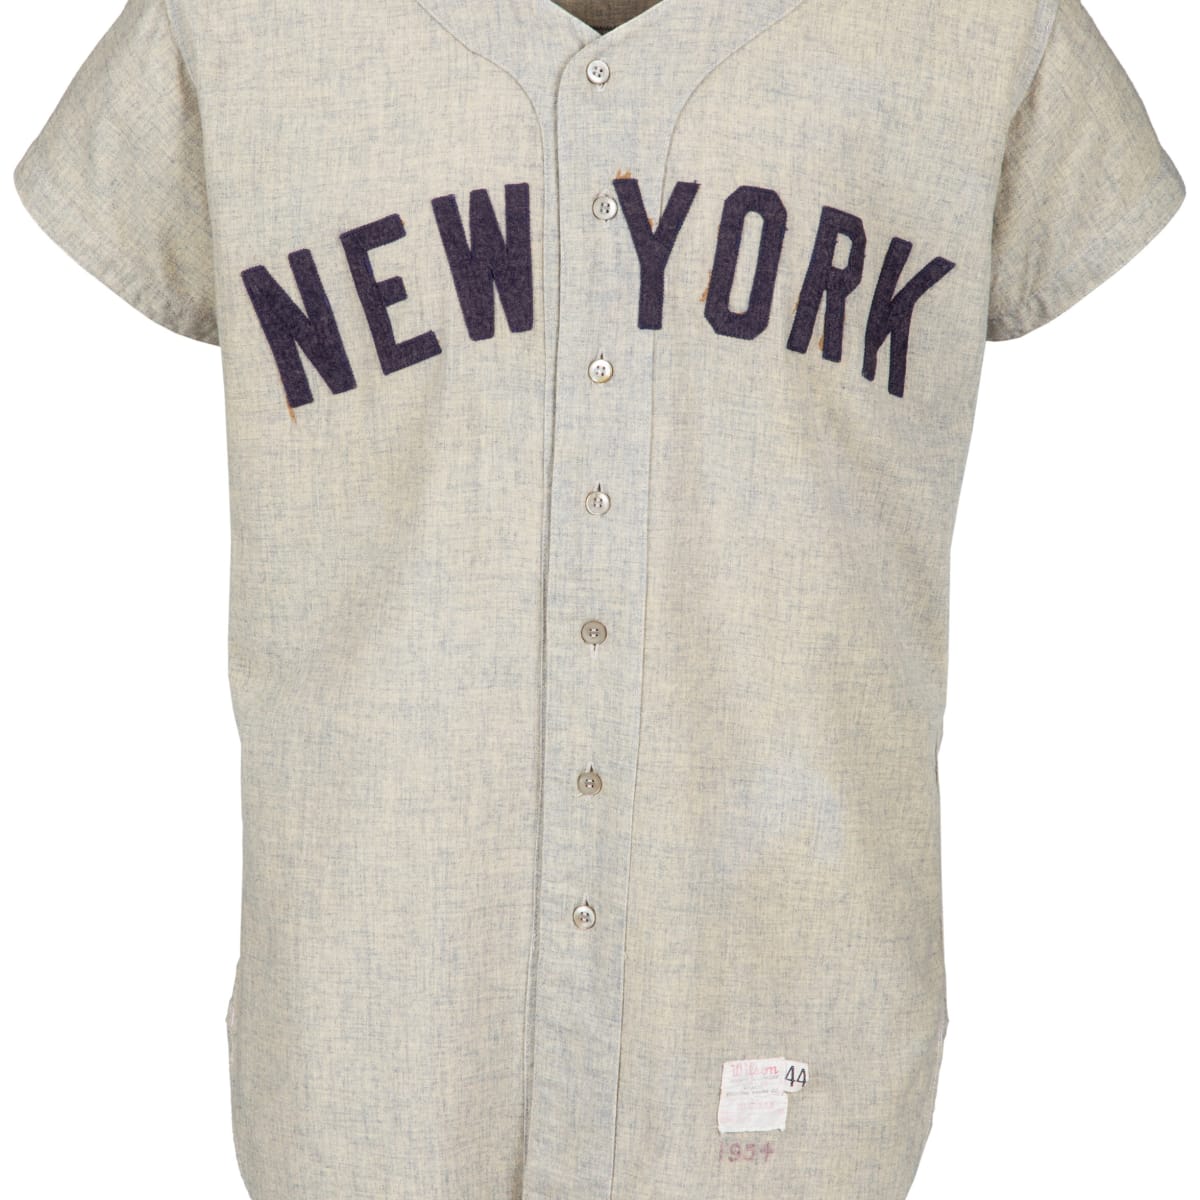 Game-worn Mantle, DiMaggio jerseys attract big dollars at Heritage Auctions  - Sports Collectors Digest